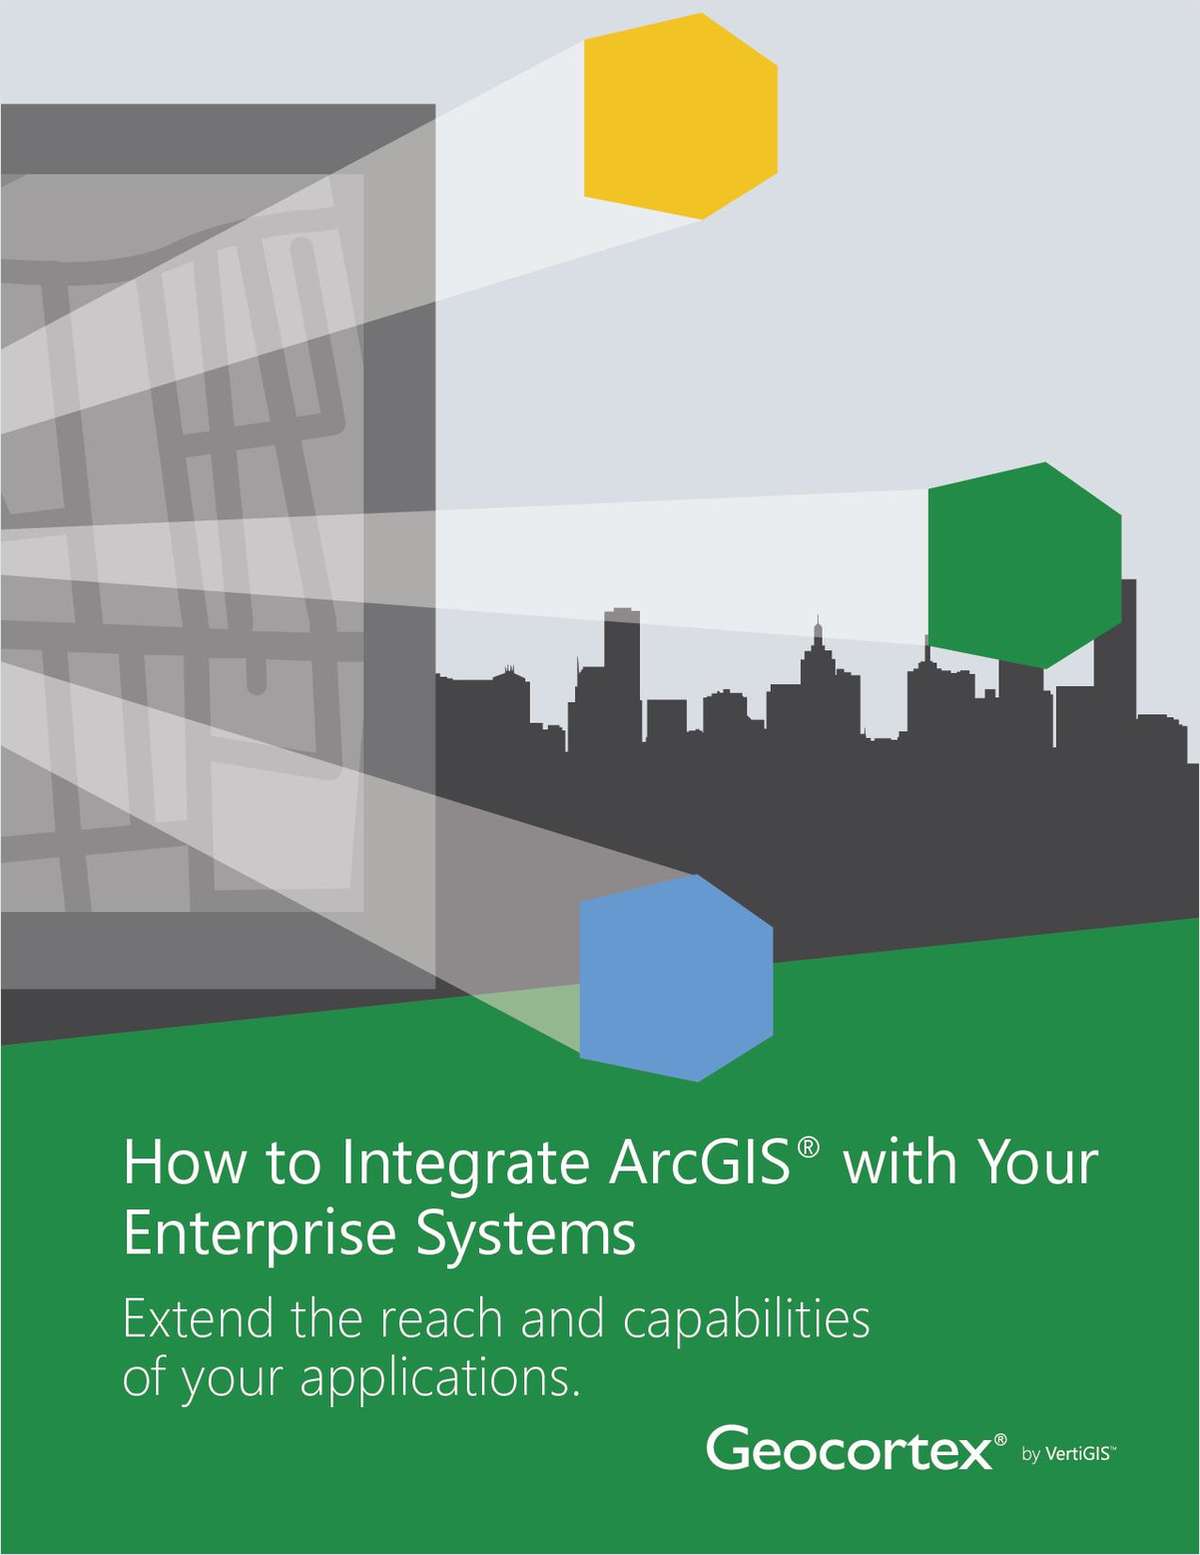 How to Integrate ArcGIS® with Enterprise Systems like Maximo